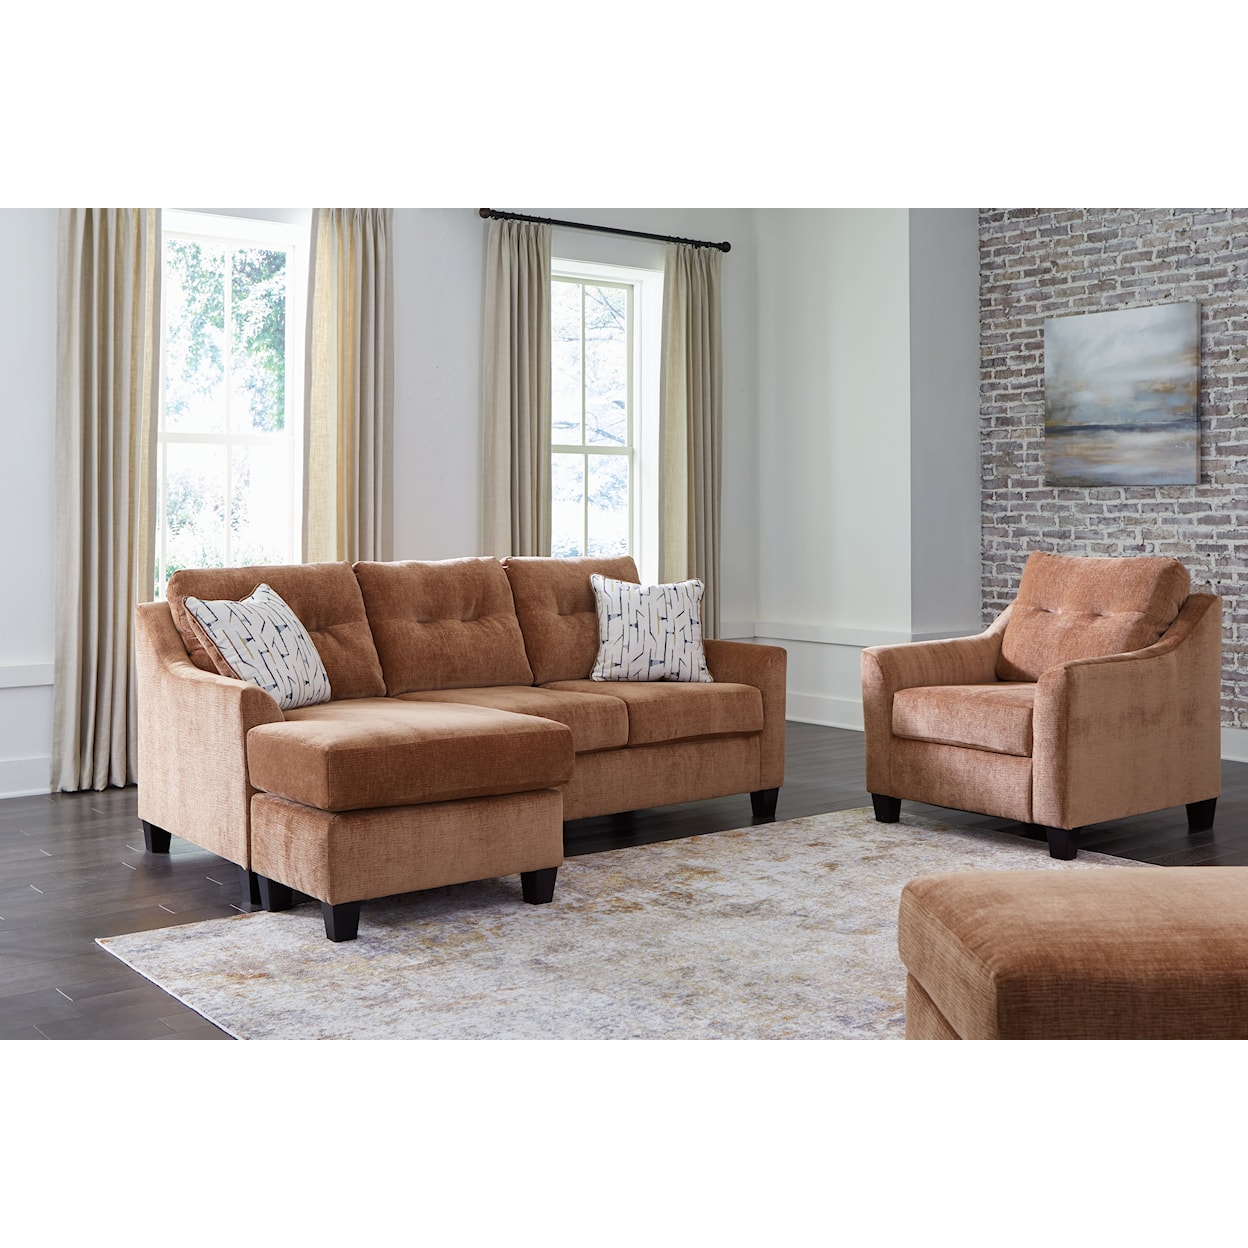 Benchcraft Amity Bay Sofa Chaise, Chair, and Ottoman